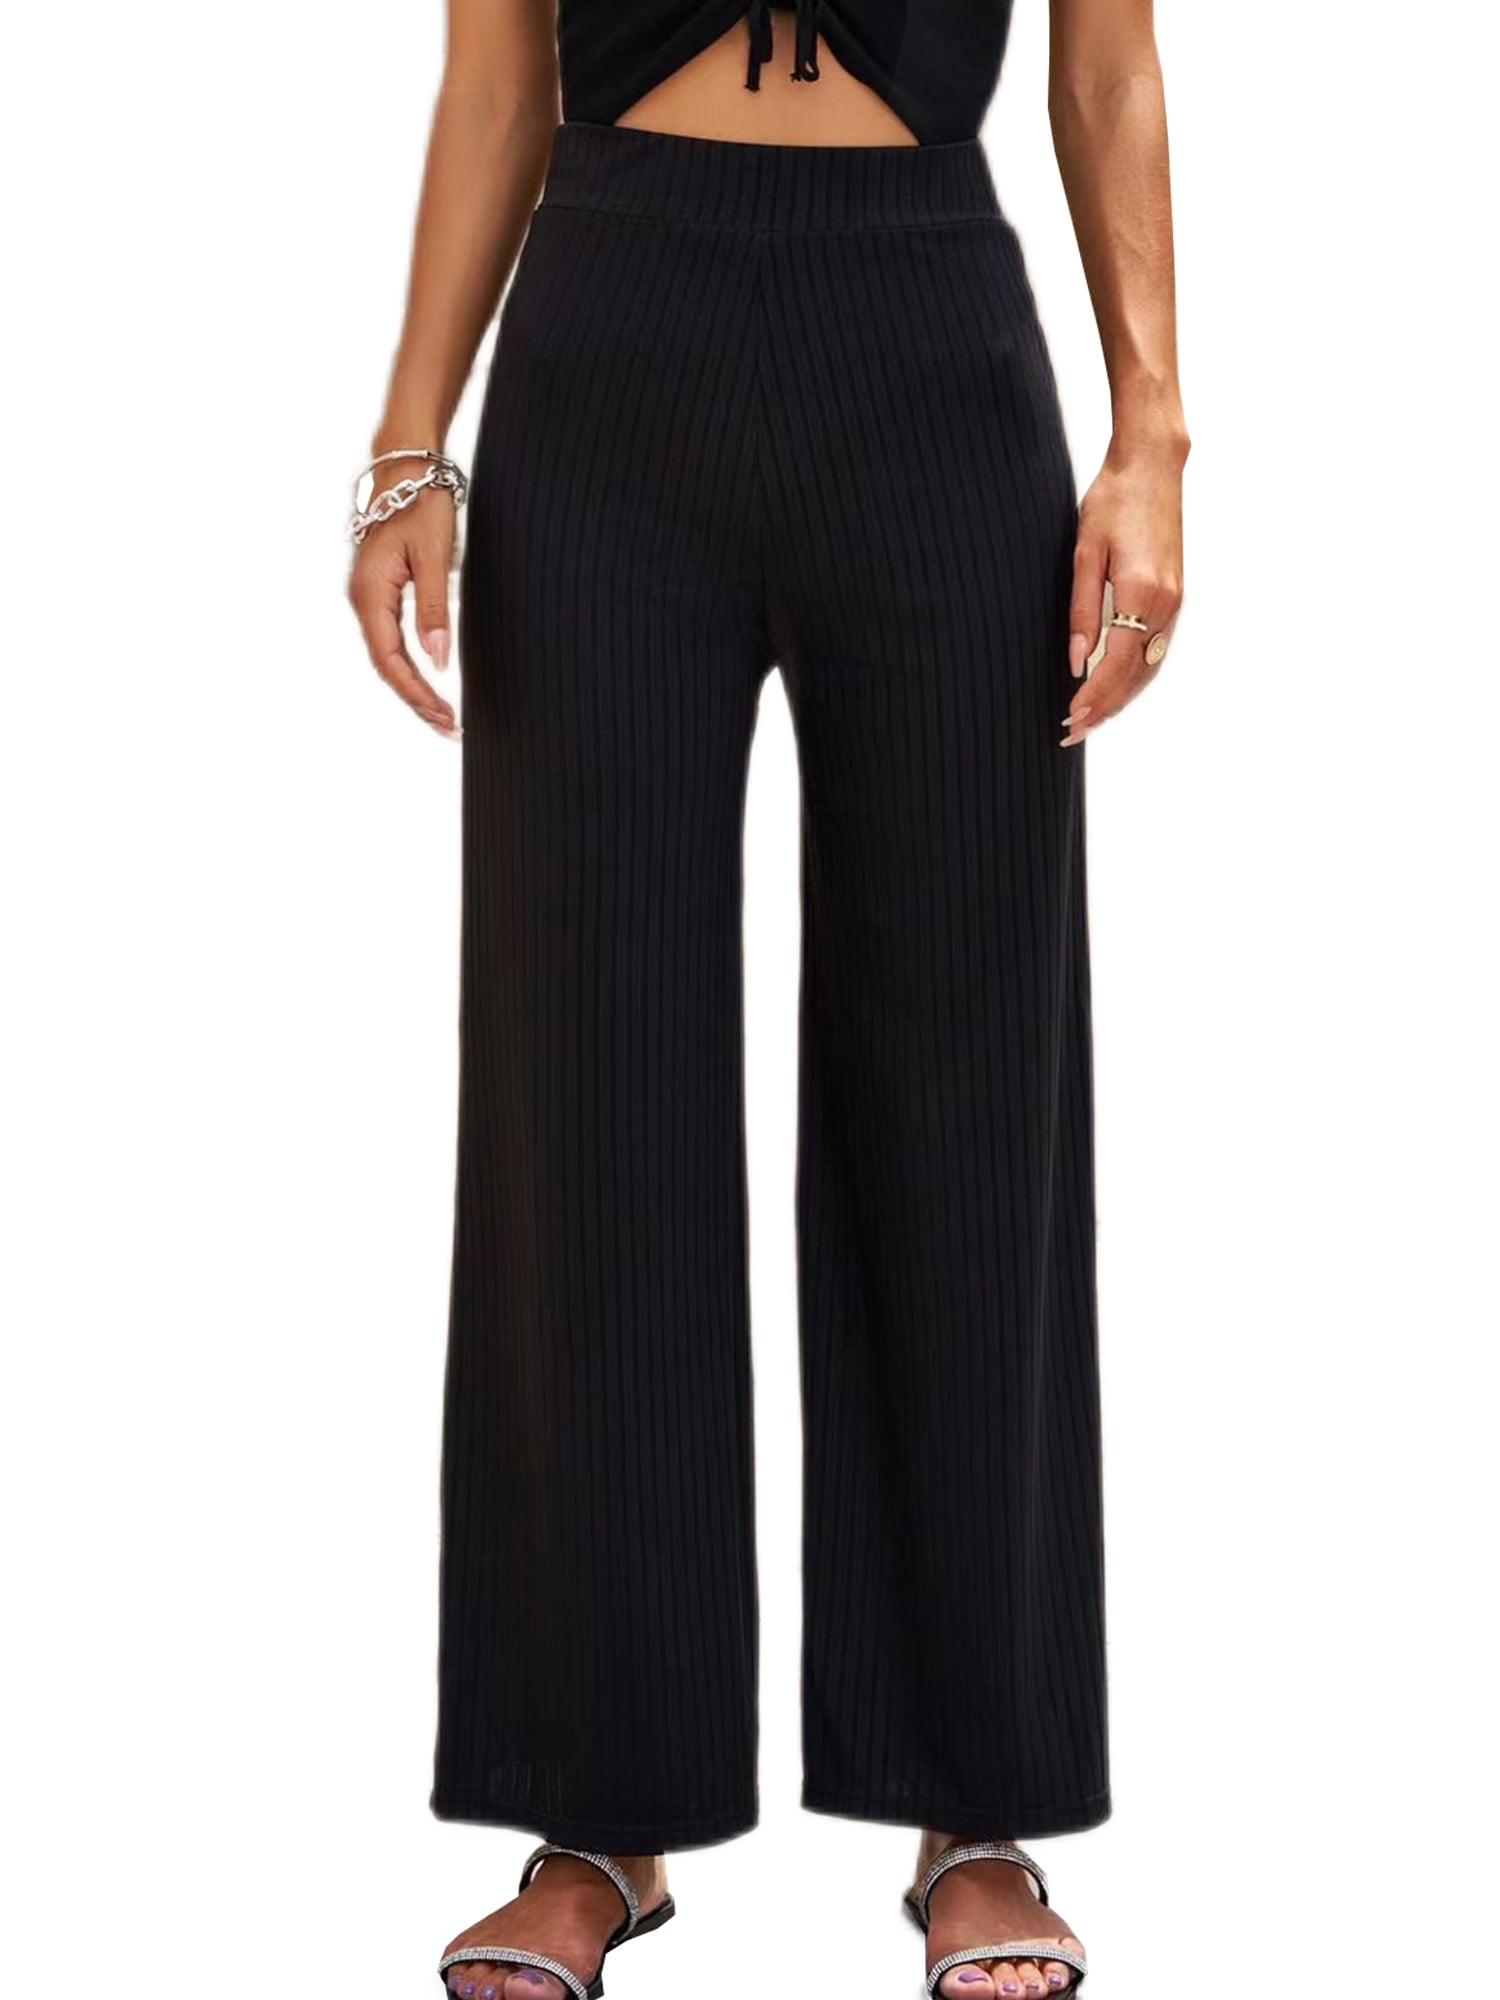 Women Lounge Wide Leg Palazzo Pant Ladies Holiday Casual Solid Color  Loungewear | eBay